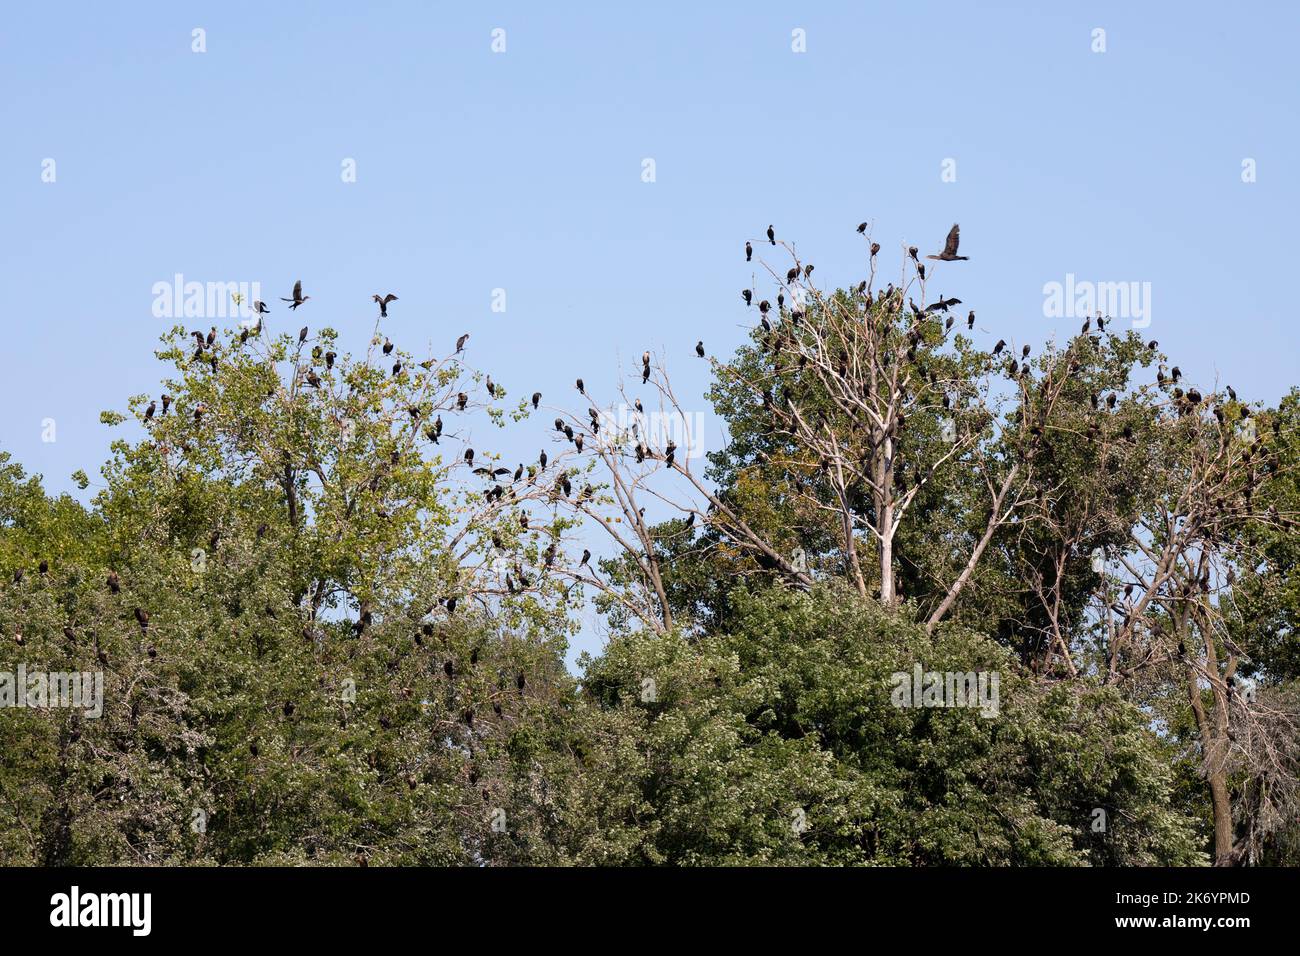 Cormorants roosting on trees on the Upper Mississippi River. Roosting cormorants damage trees.  Eventually the trees die. Stock Photo